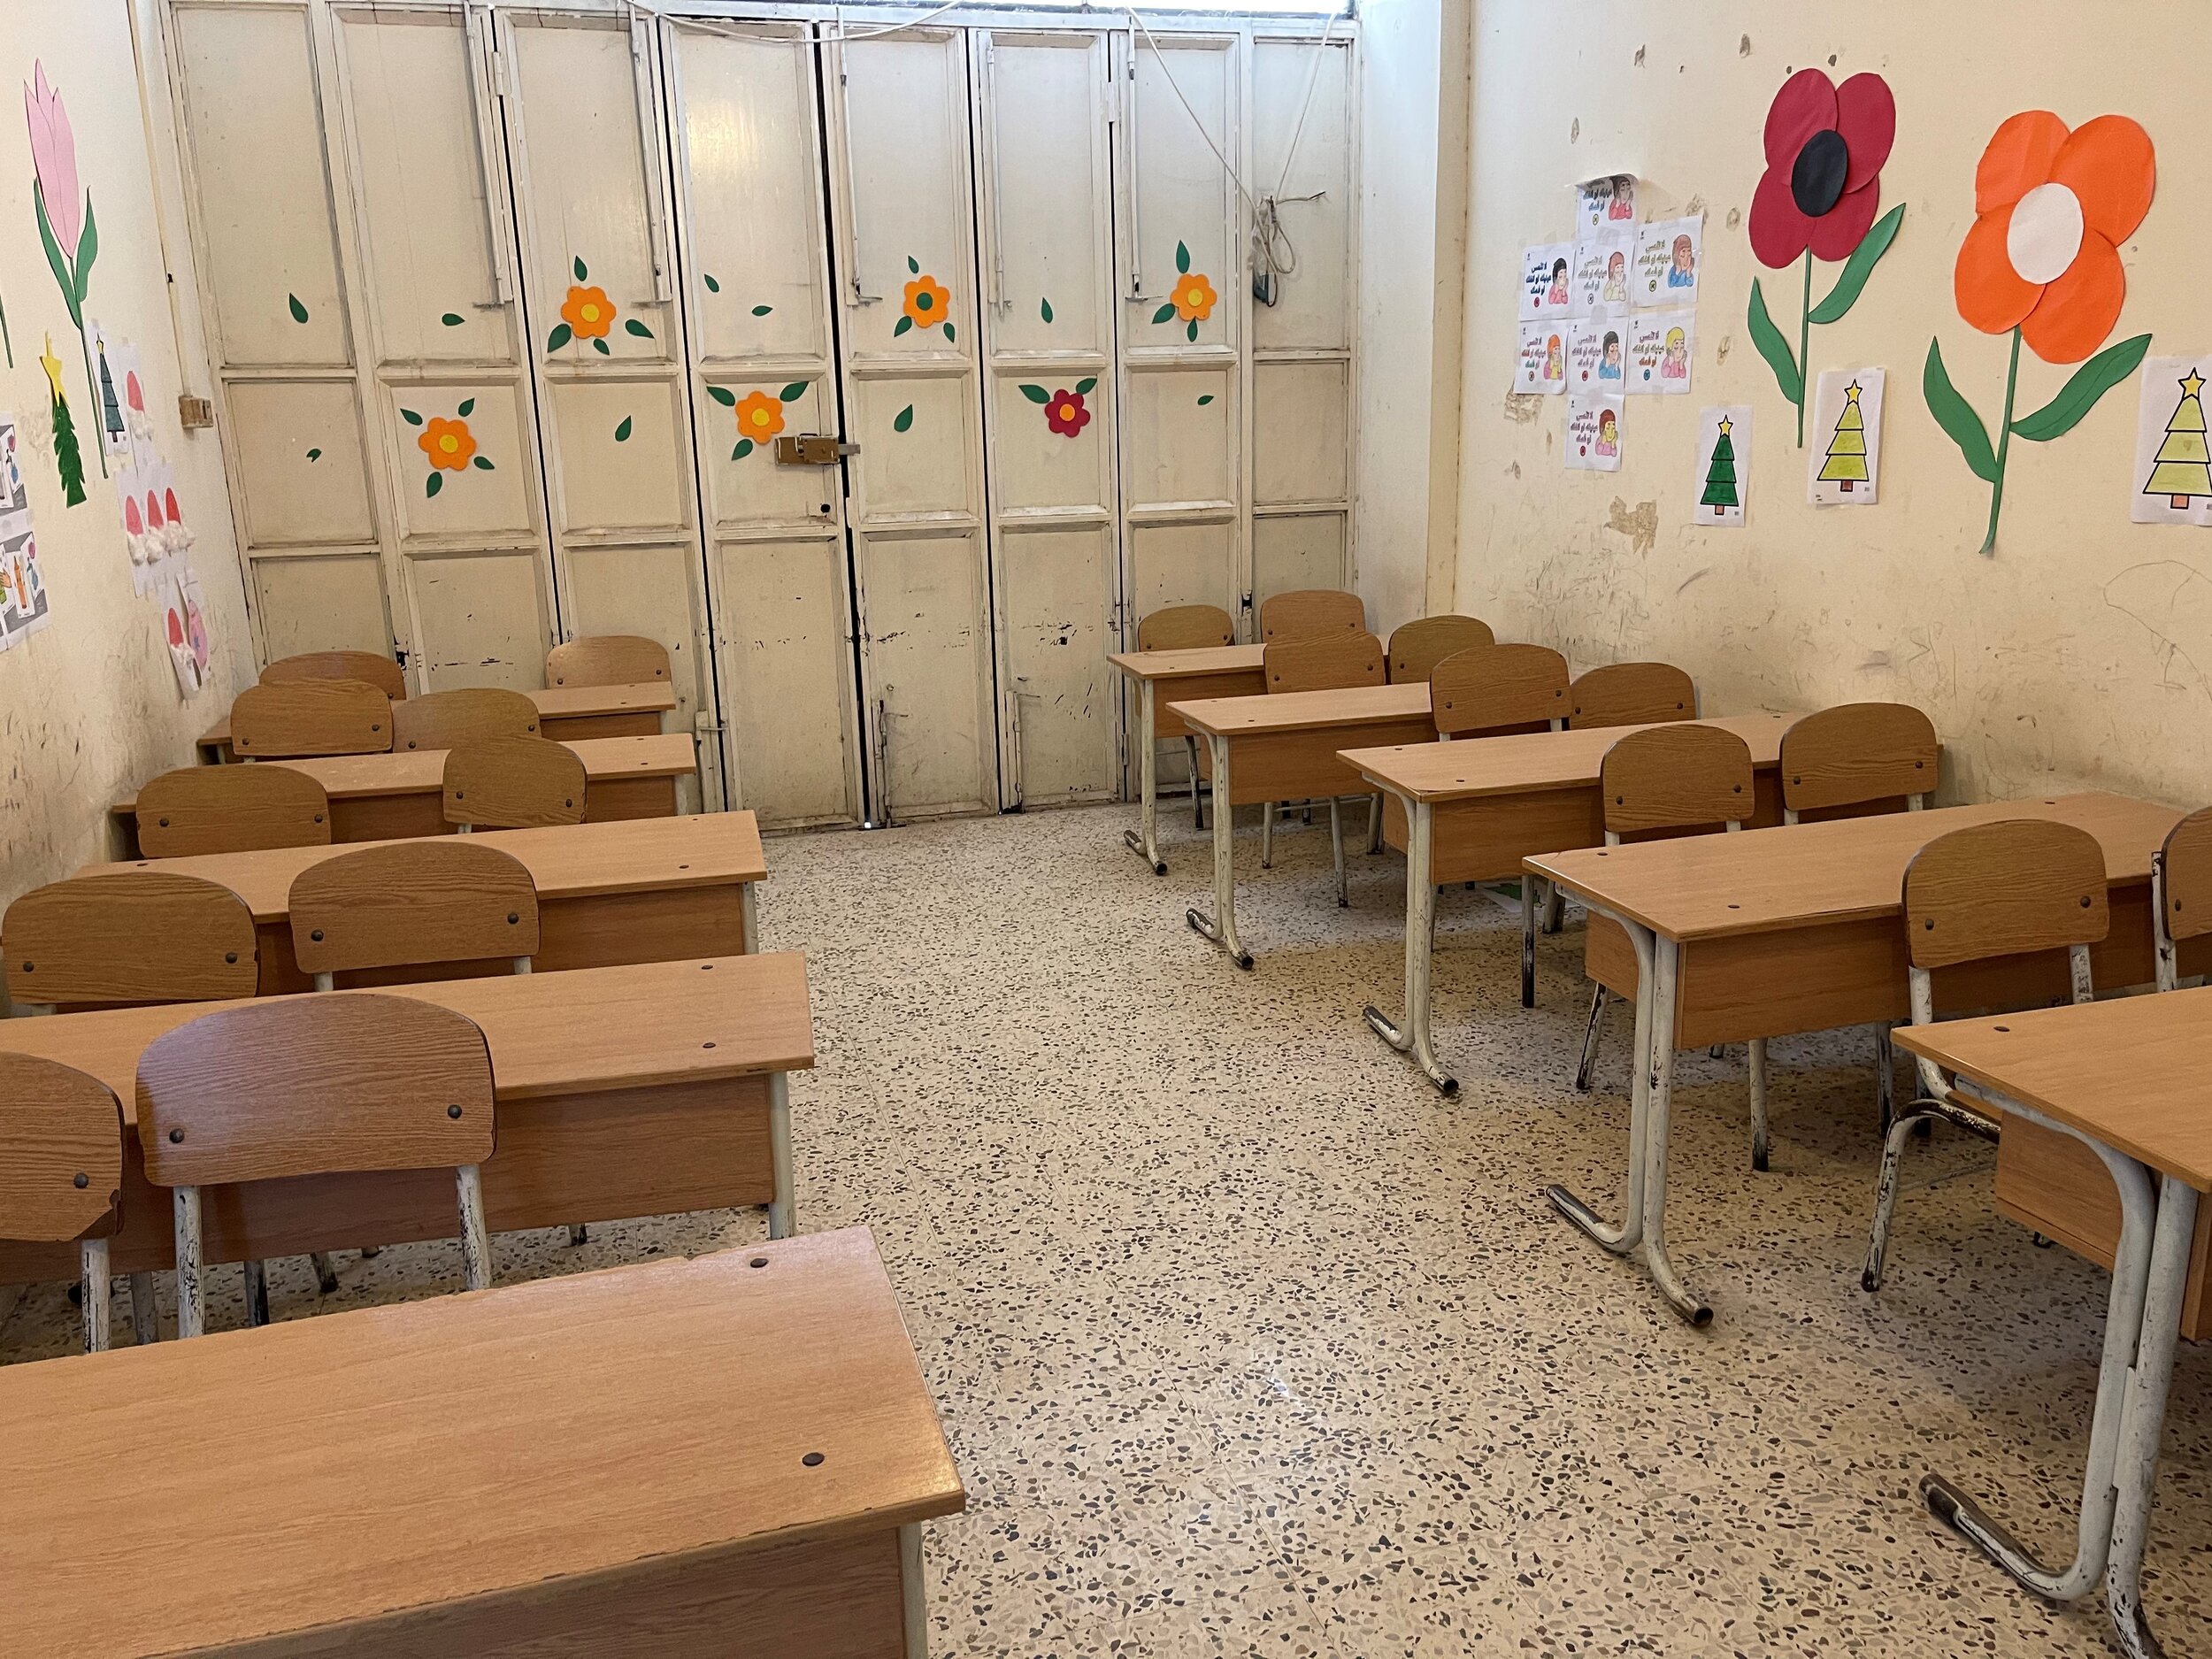  Classroom for the refugee children 